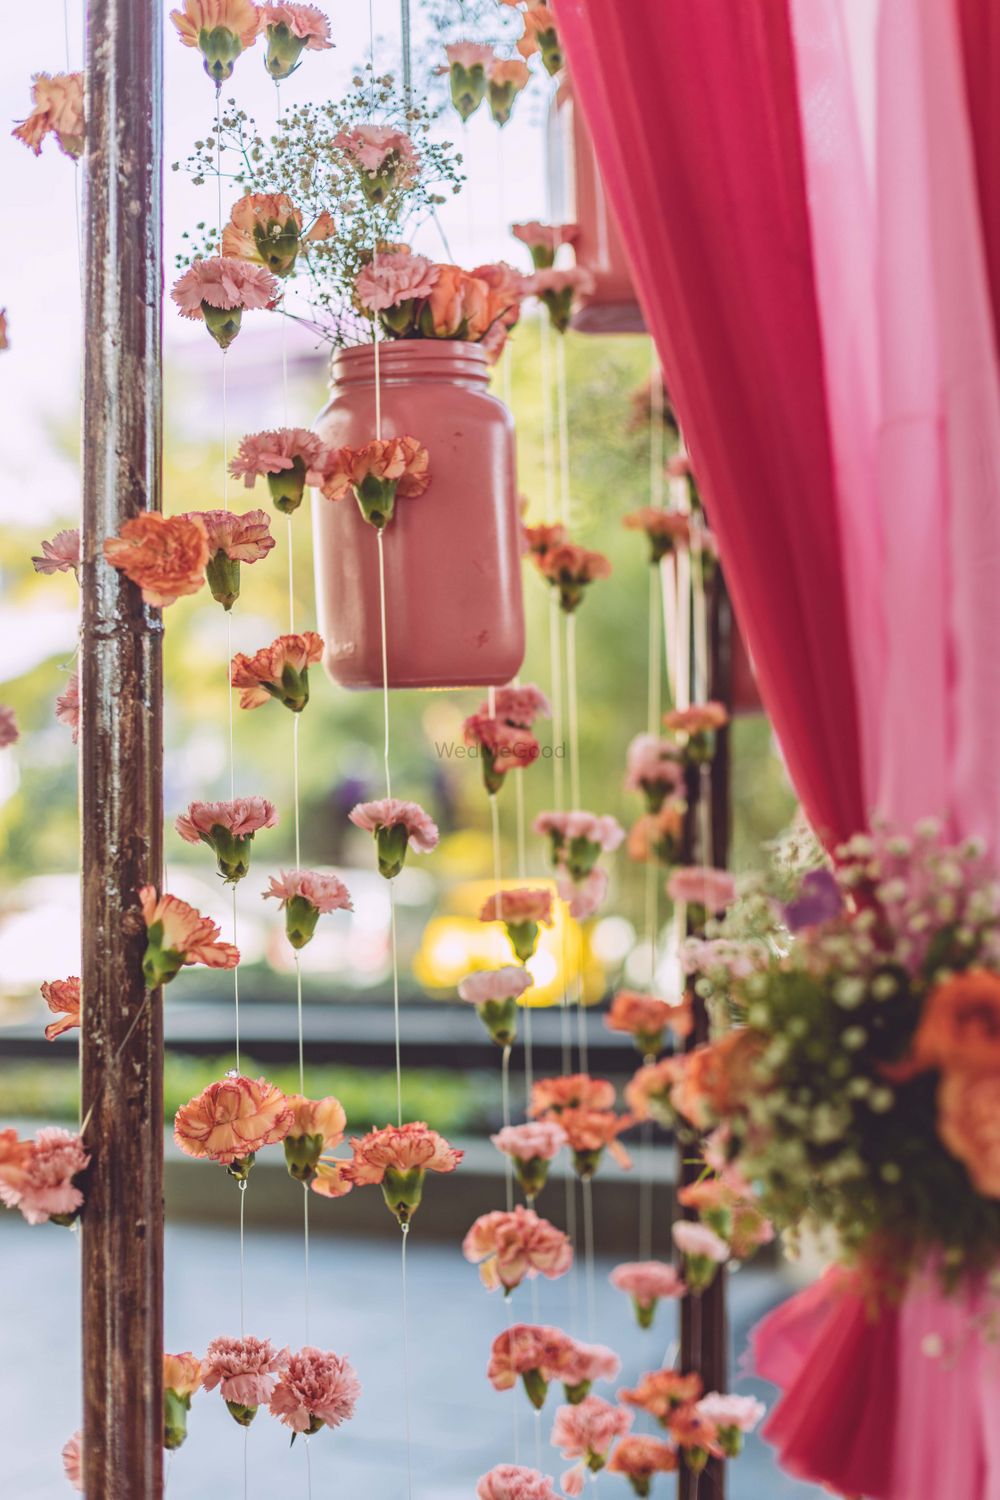 Photo of Hanging jars with flowers in decor